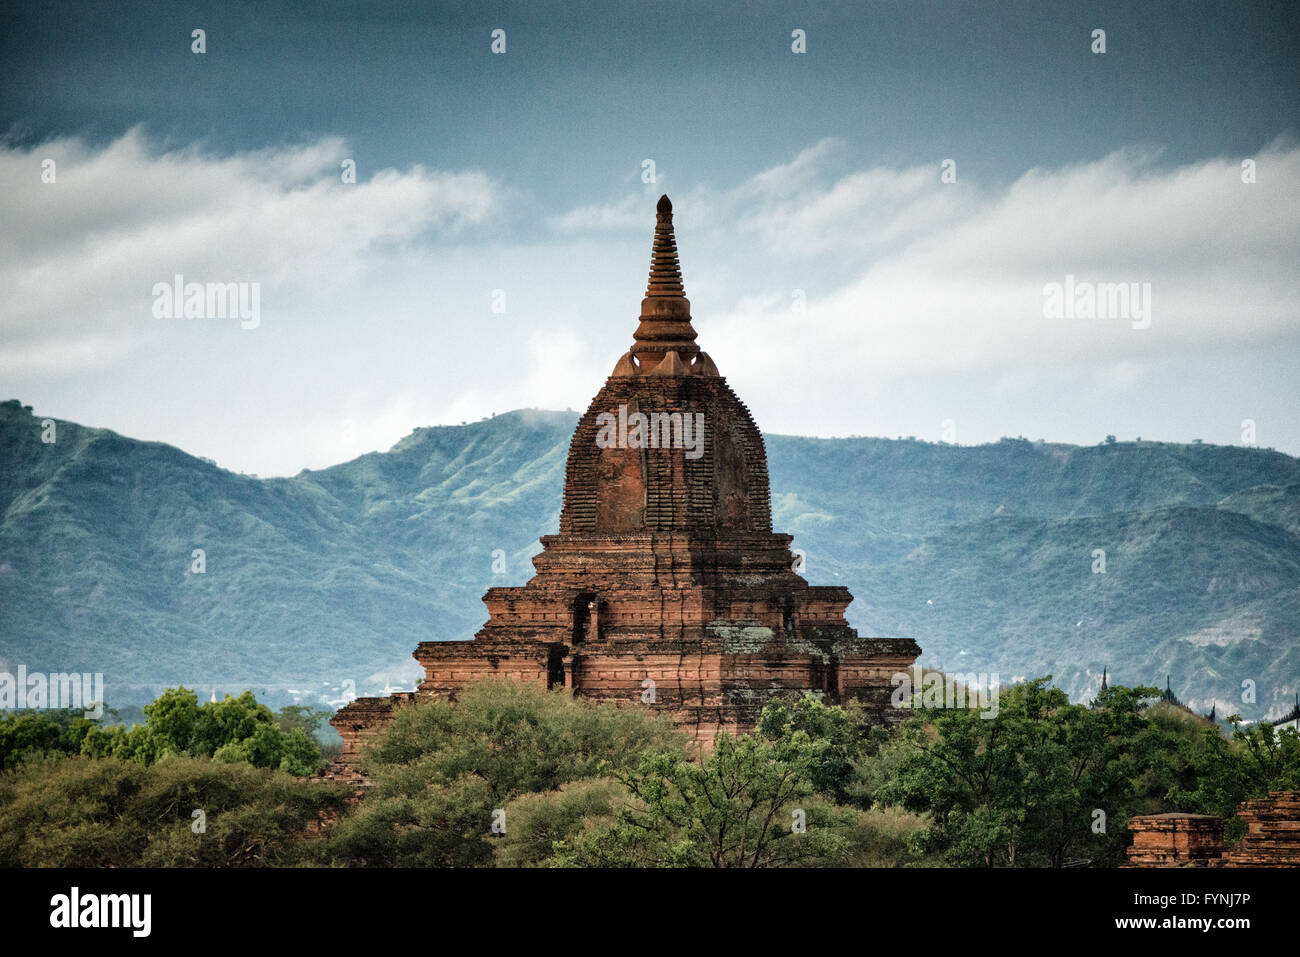 BAGAN, Myanmar - One of the thousands of pagodas and stupa on the plan of Bagan in Myanmar (Burma). This one is in the northwest corner of the Bagan Archeological Zone and are seen from Shegy Gyi Phaya. Stock Photo